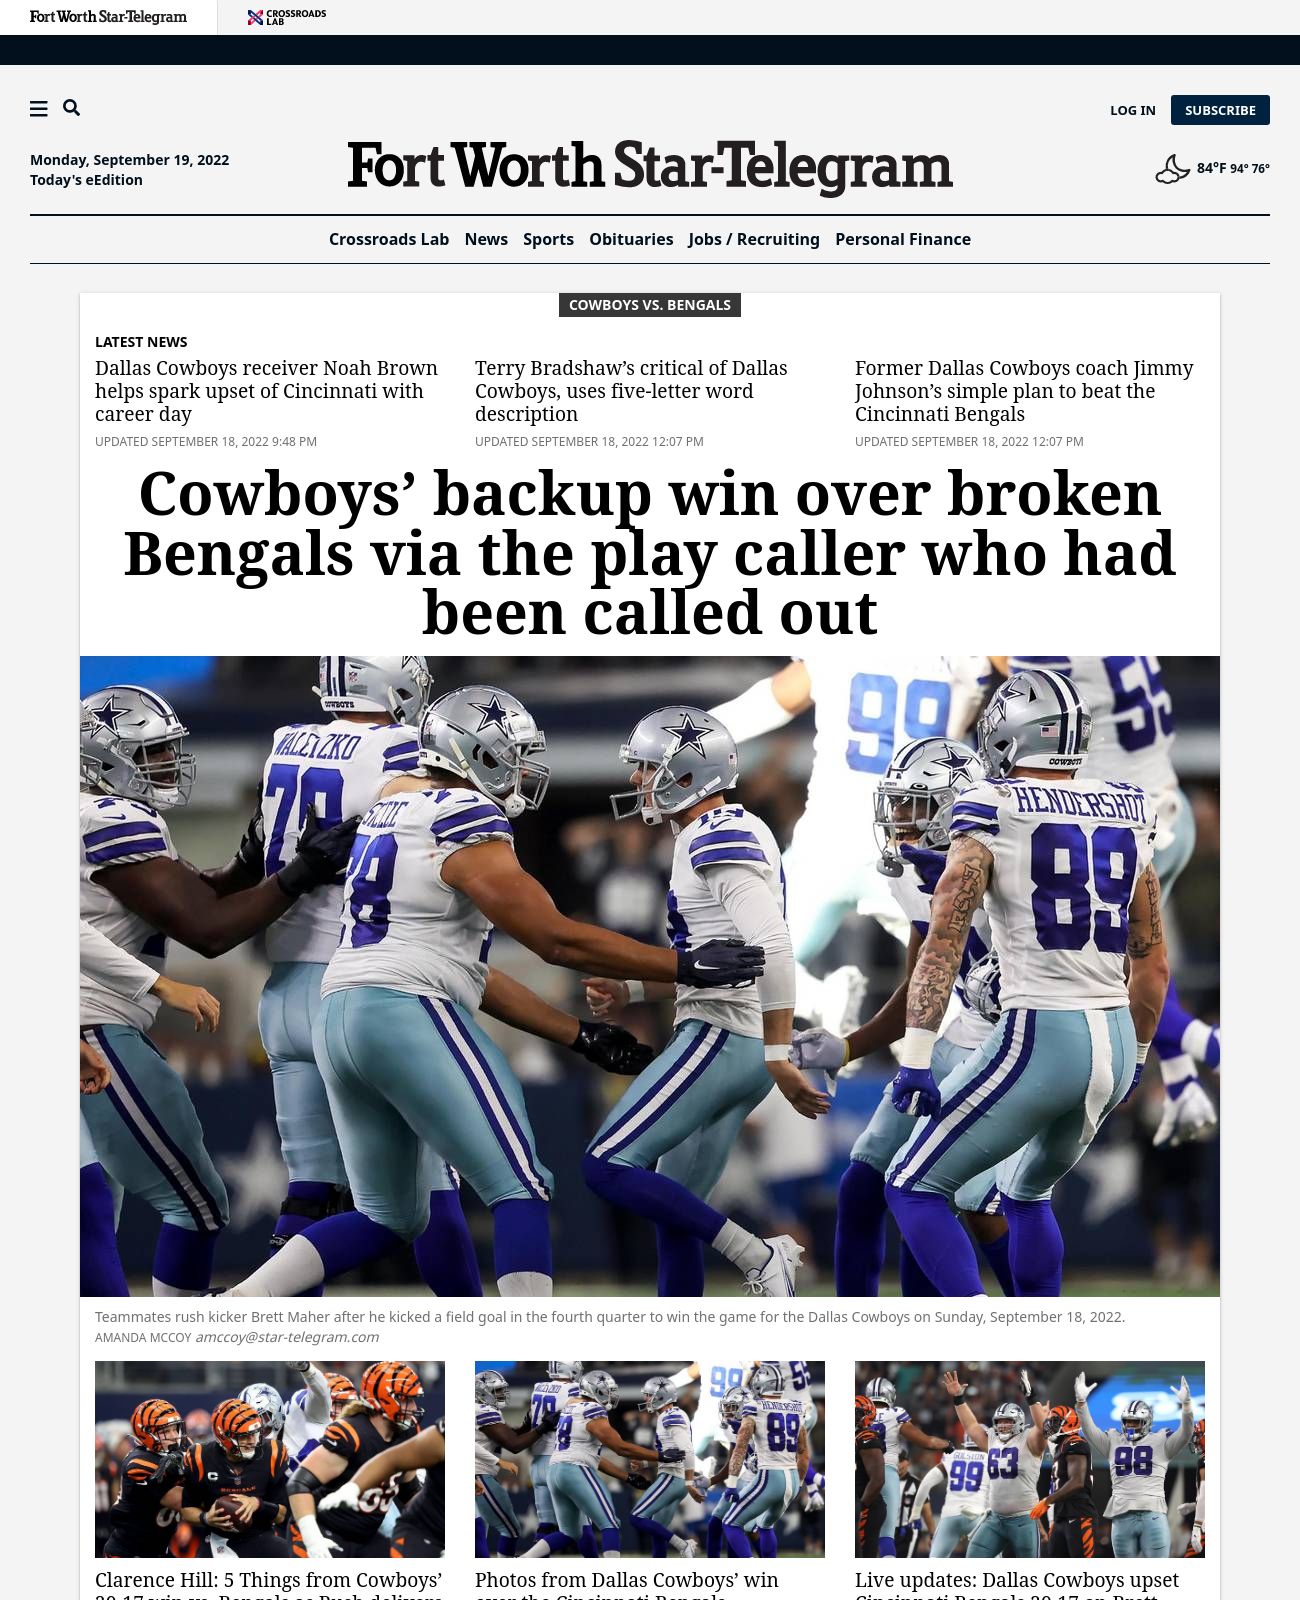 Fort Worth Star-Telegram at 2022-09-19 00:58:06-05:00 local time